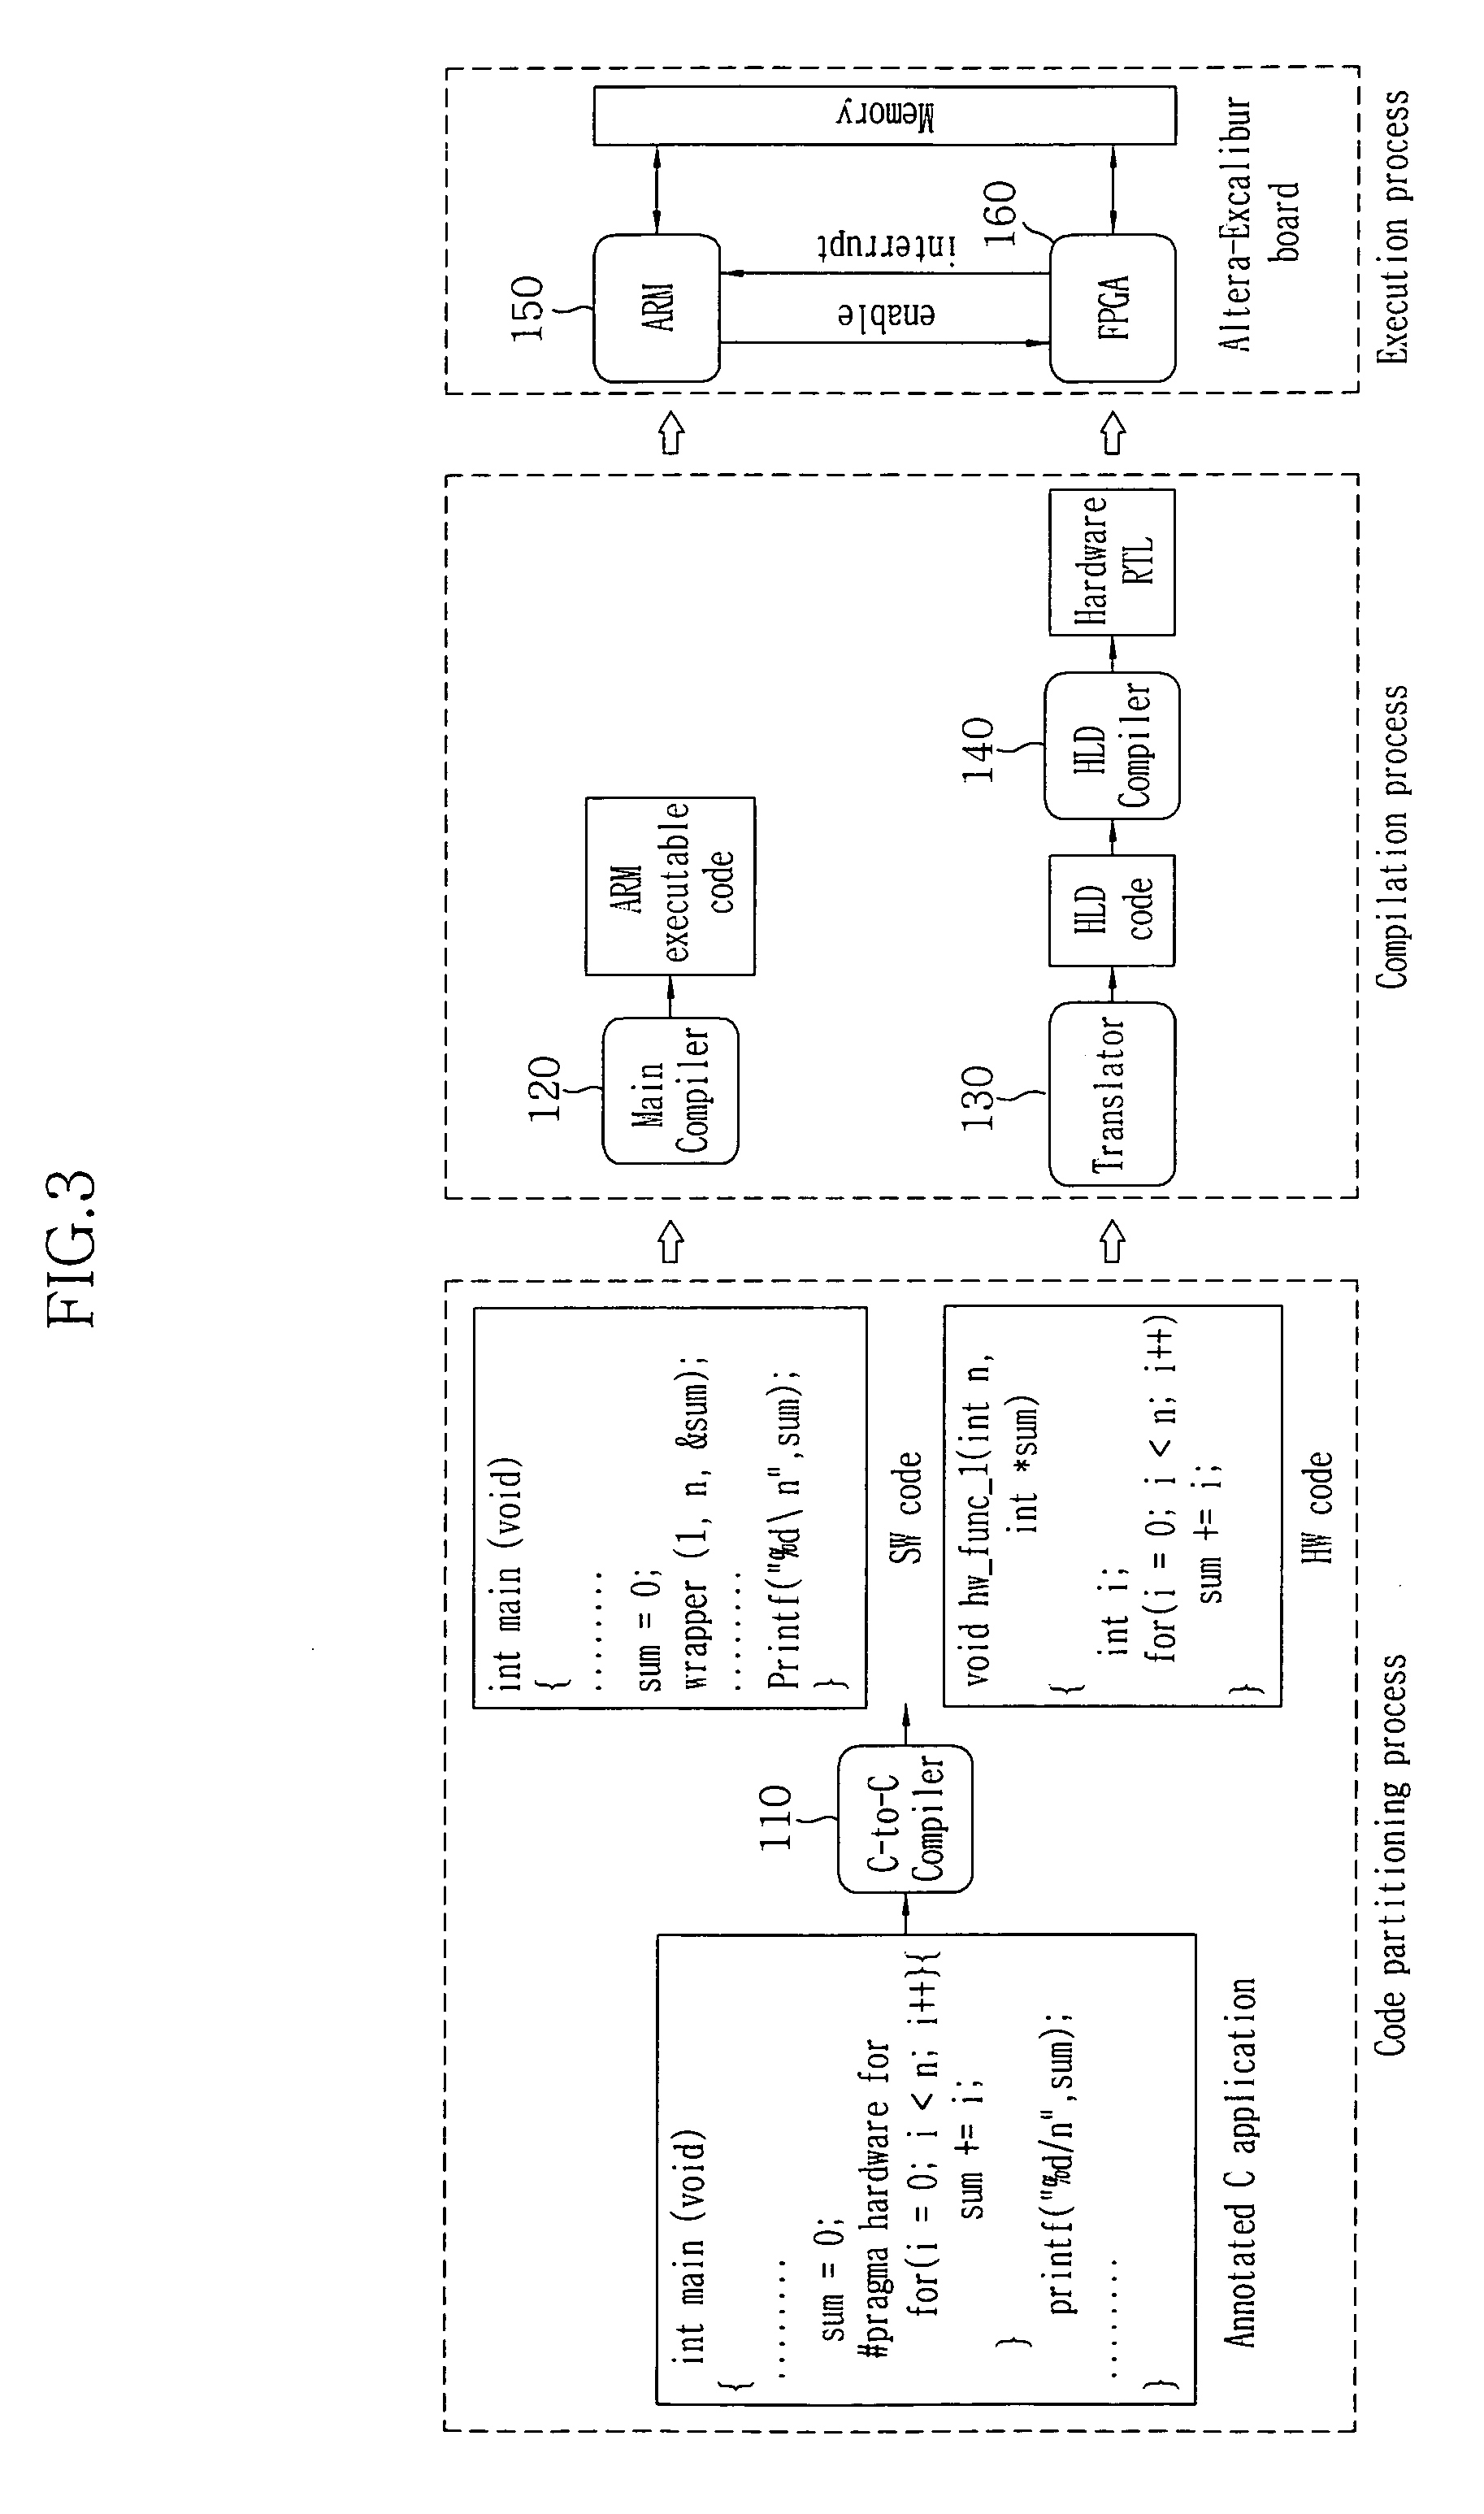 System and Method for translating high programming level languages code into Hardware Description Language code